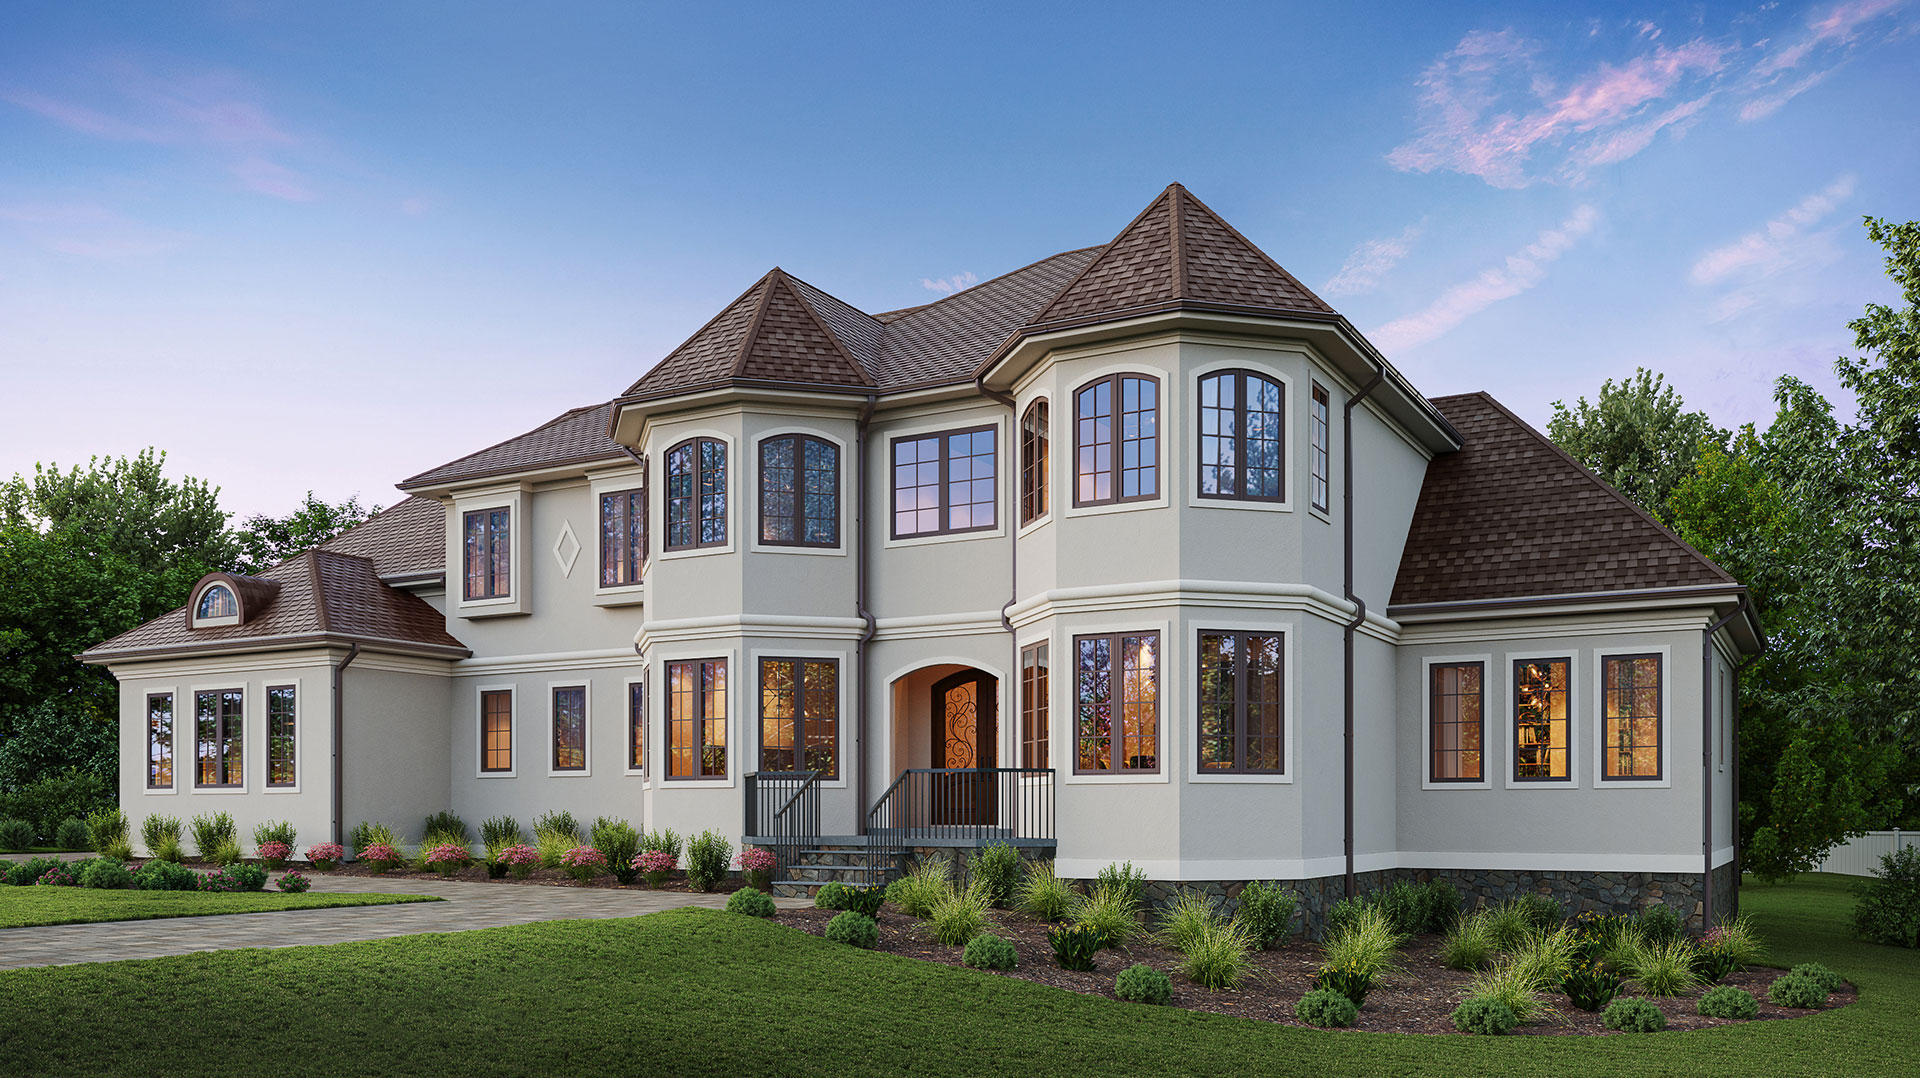 A mediterranean style front exterior in light beige stucco with brown windows and white trim.